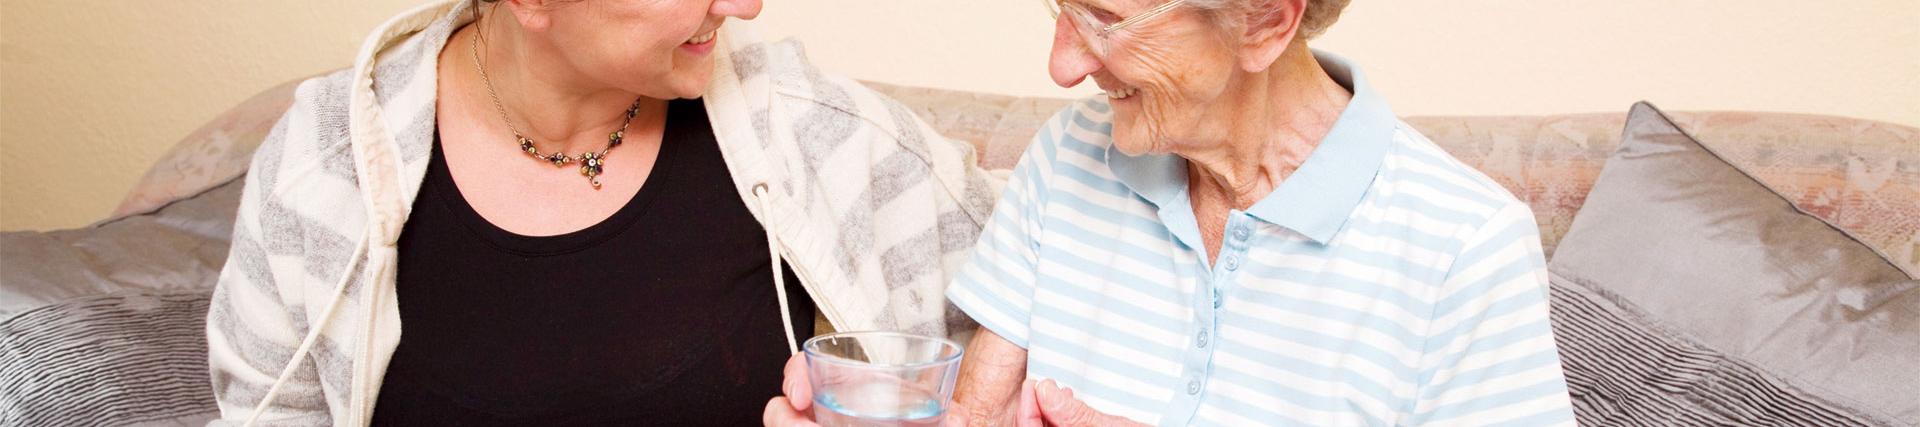 an older person holding a glass of water sitting next to her carer